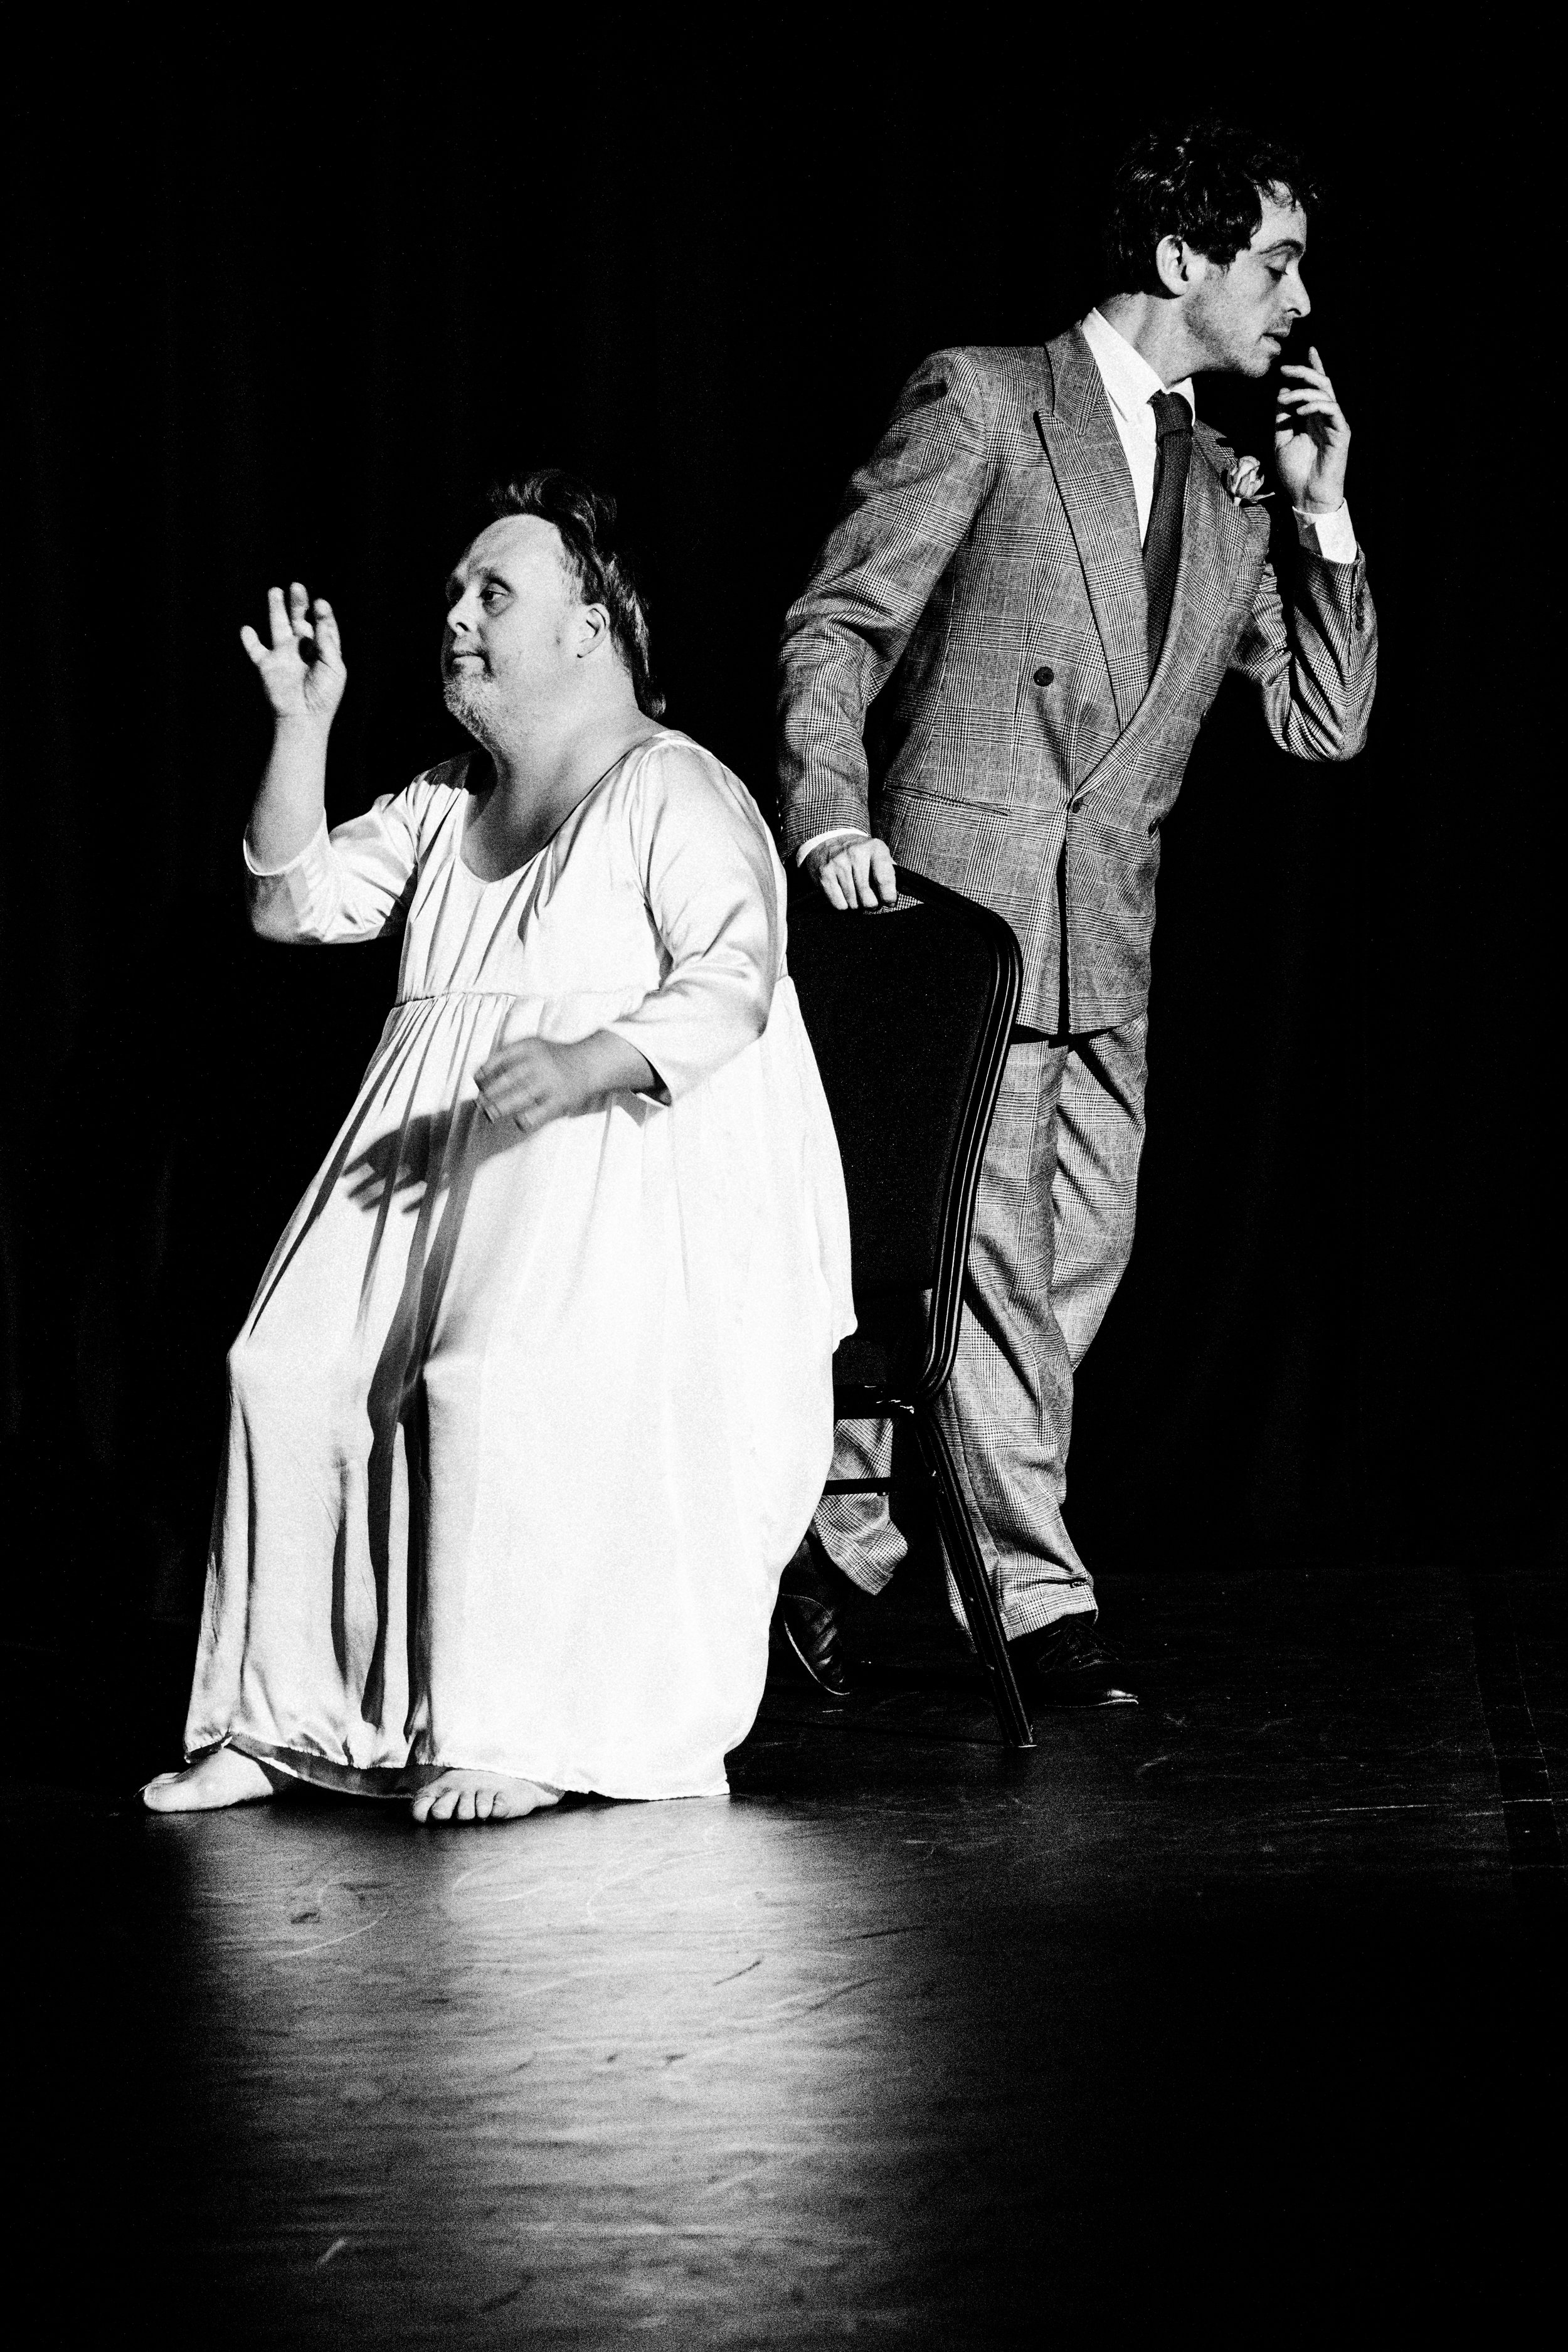 The image is in black and white and is of two performers. One sits down, looks off to the left and wears a long white dress. The other stands up, looks off to the right and wears a suit